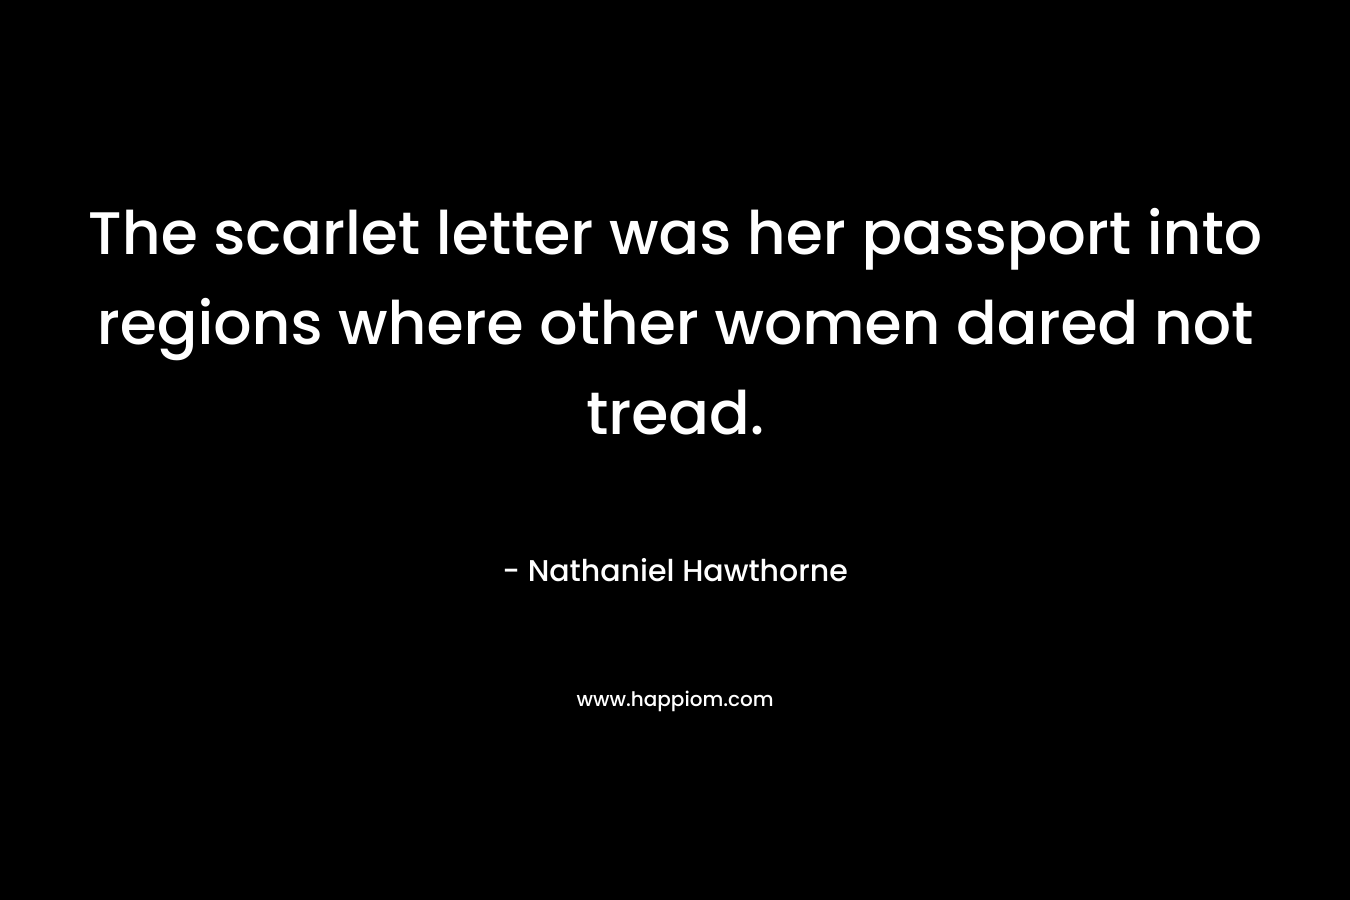 The scarlet letter was her passport into regions where other women dared not tread. – Nathaniel Hawthorne